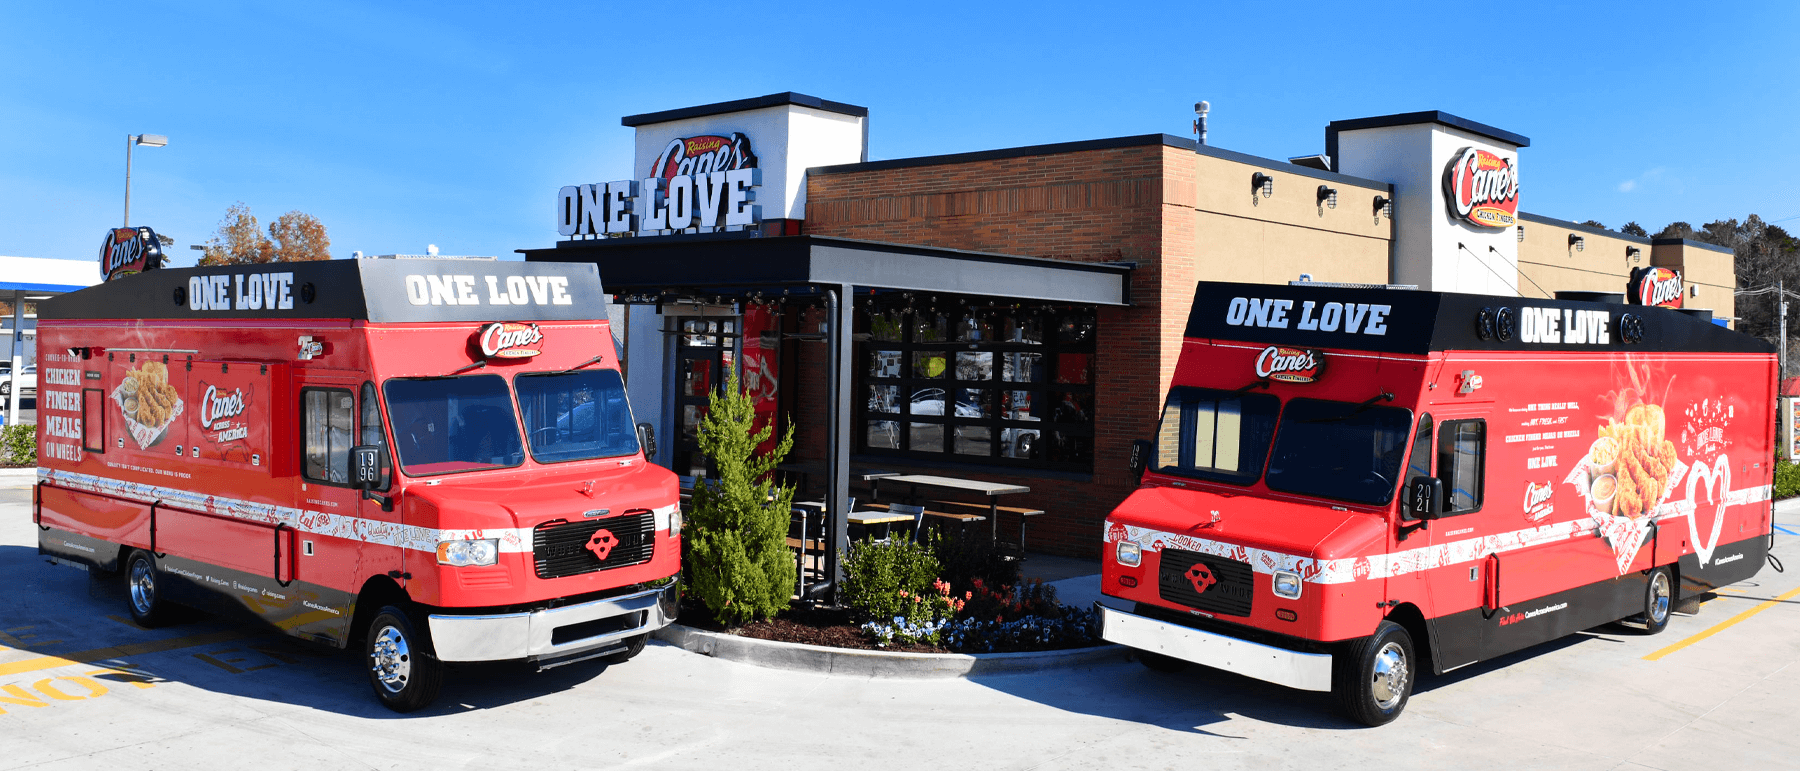 Raising Cane's with food vans